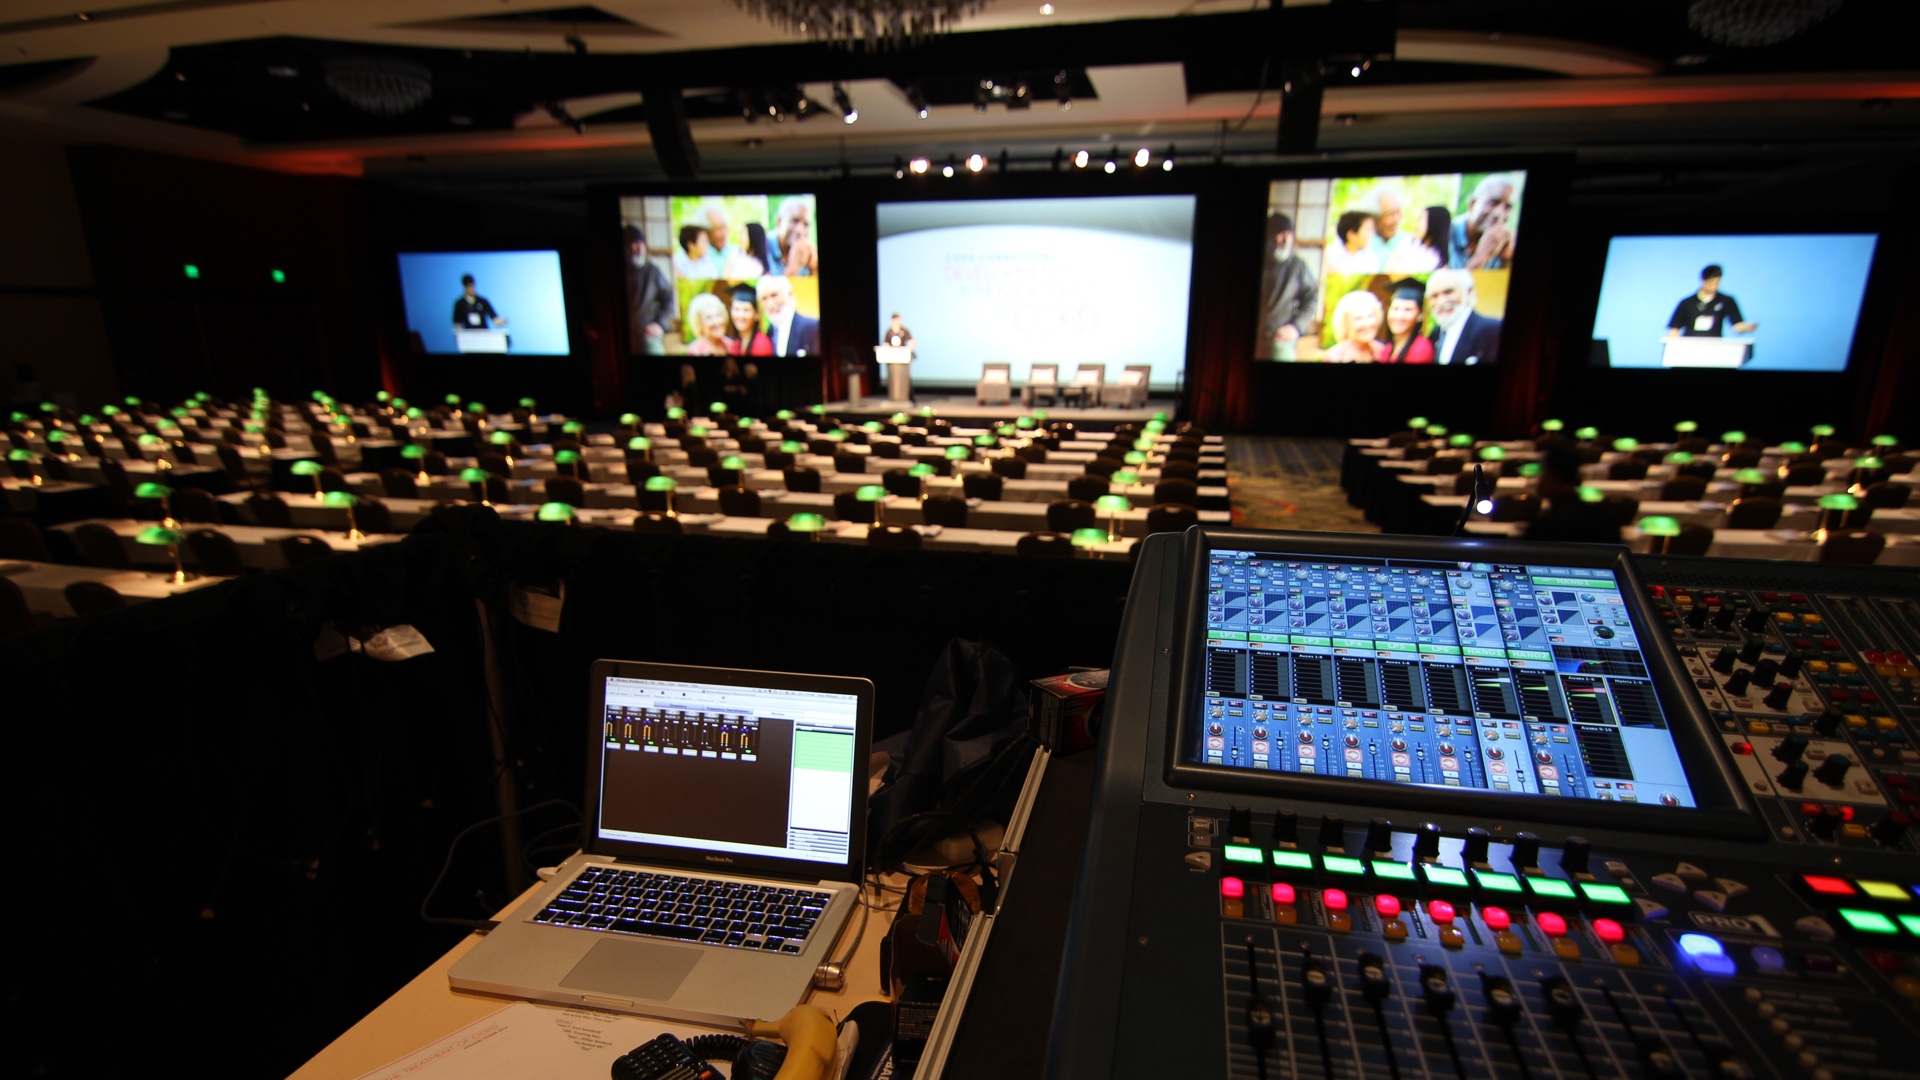 Audio Visual solution provided by SONUS with multiple video elements